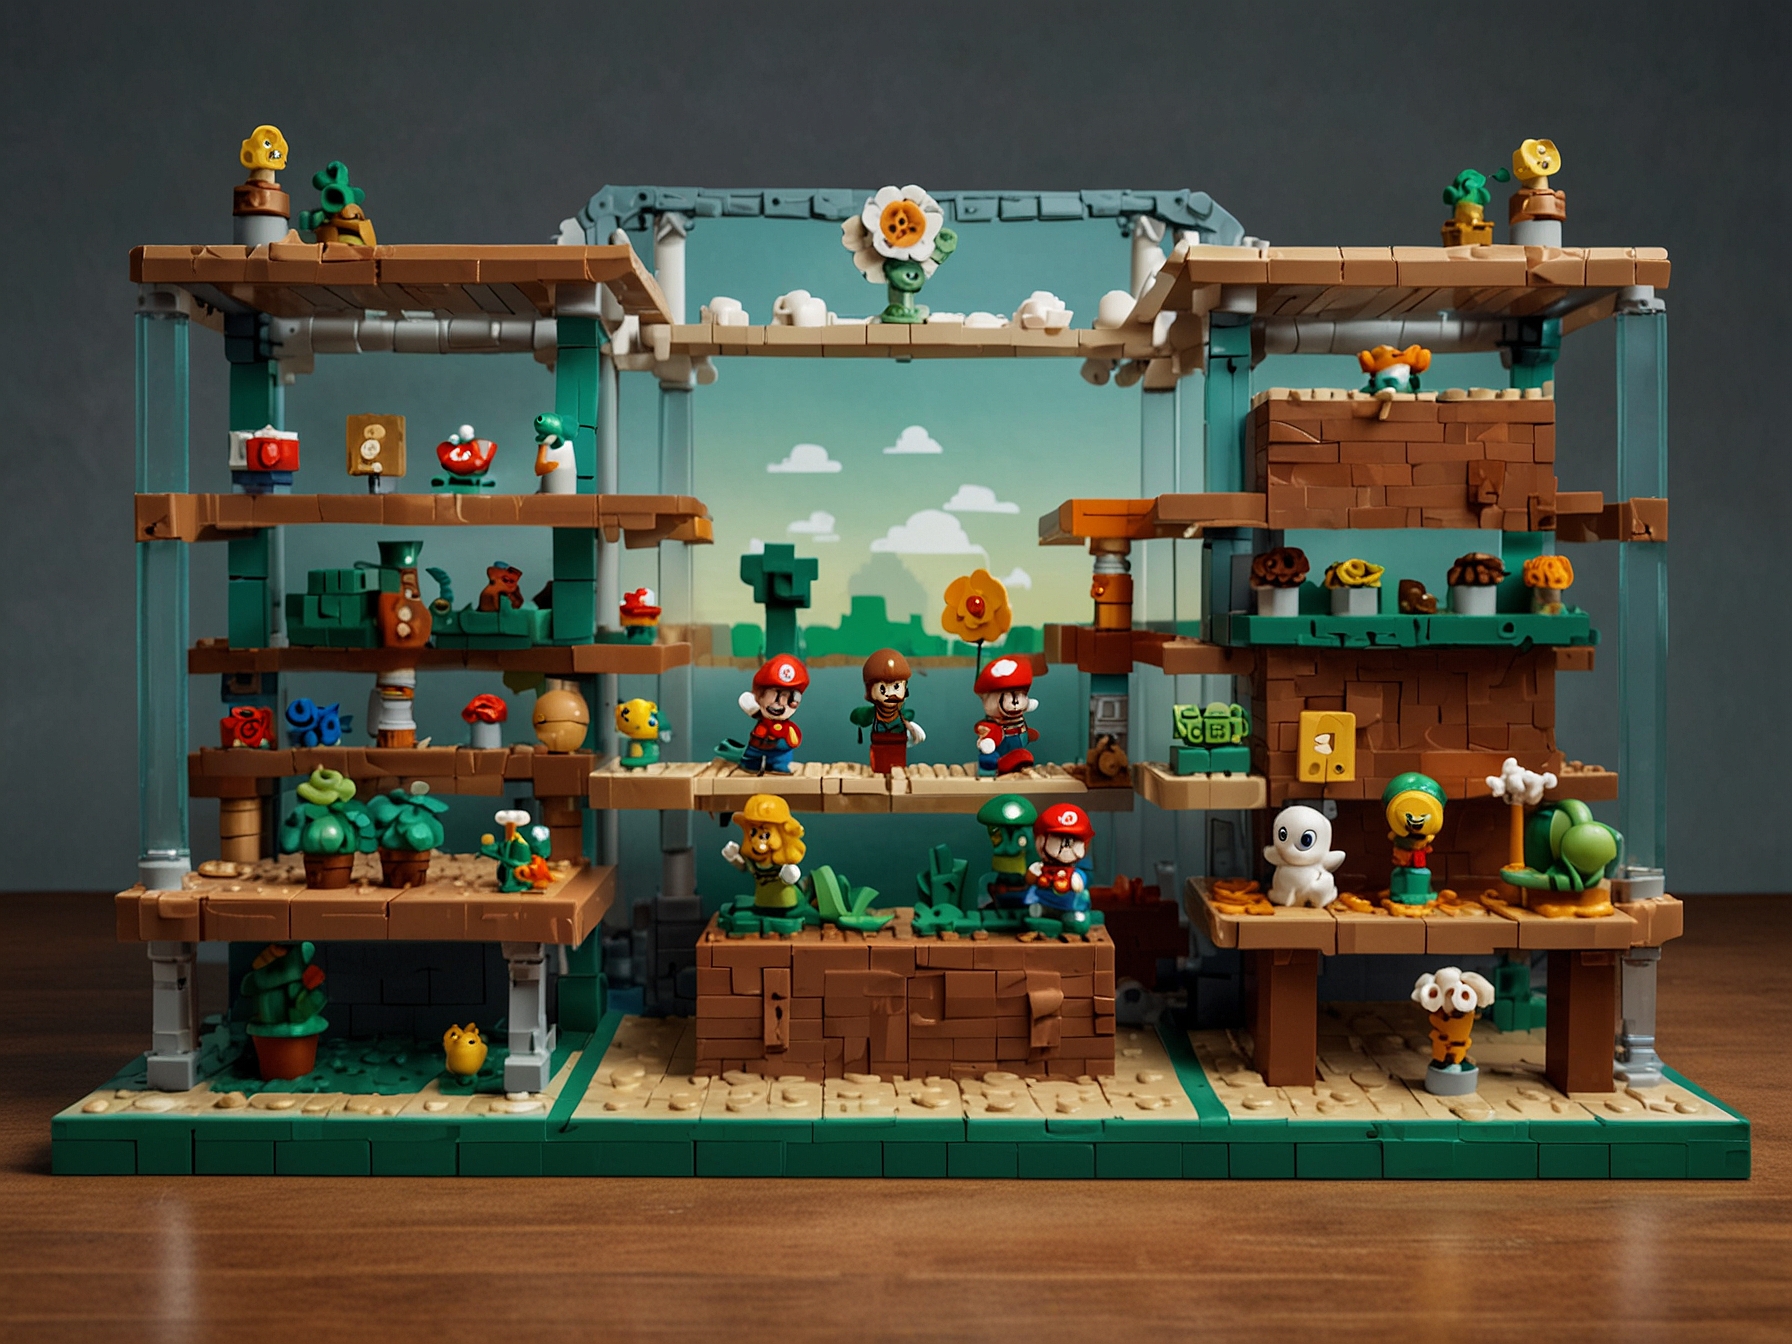 Image showcasing the Lego Super Mario Adventures Luigi and Mario Starter Courses alongside the Princess Peach set. Both sets feature interactive figures and various pieces, highlighting the diversity and compatibility of the collection.